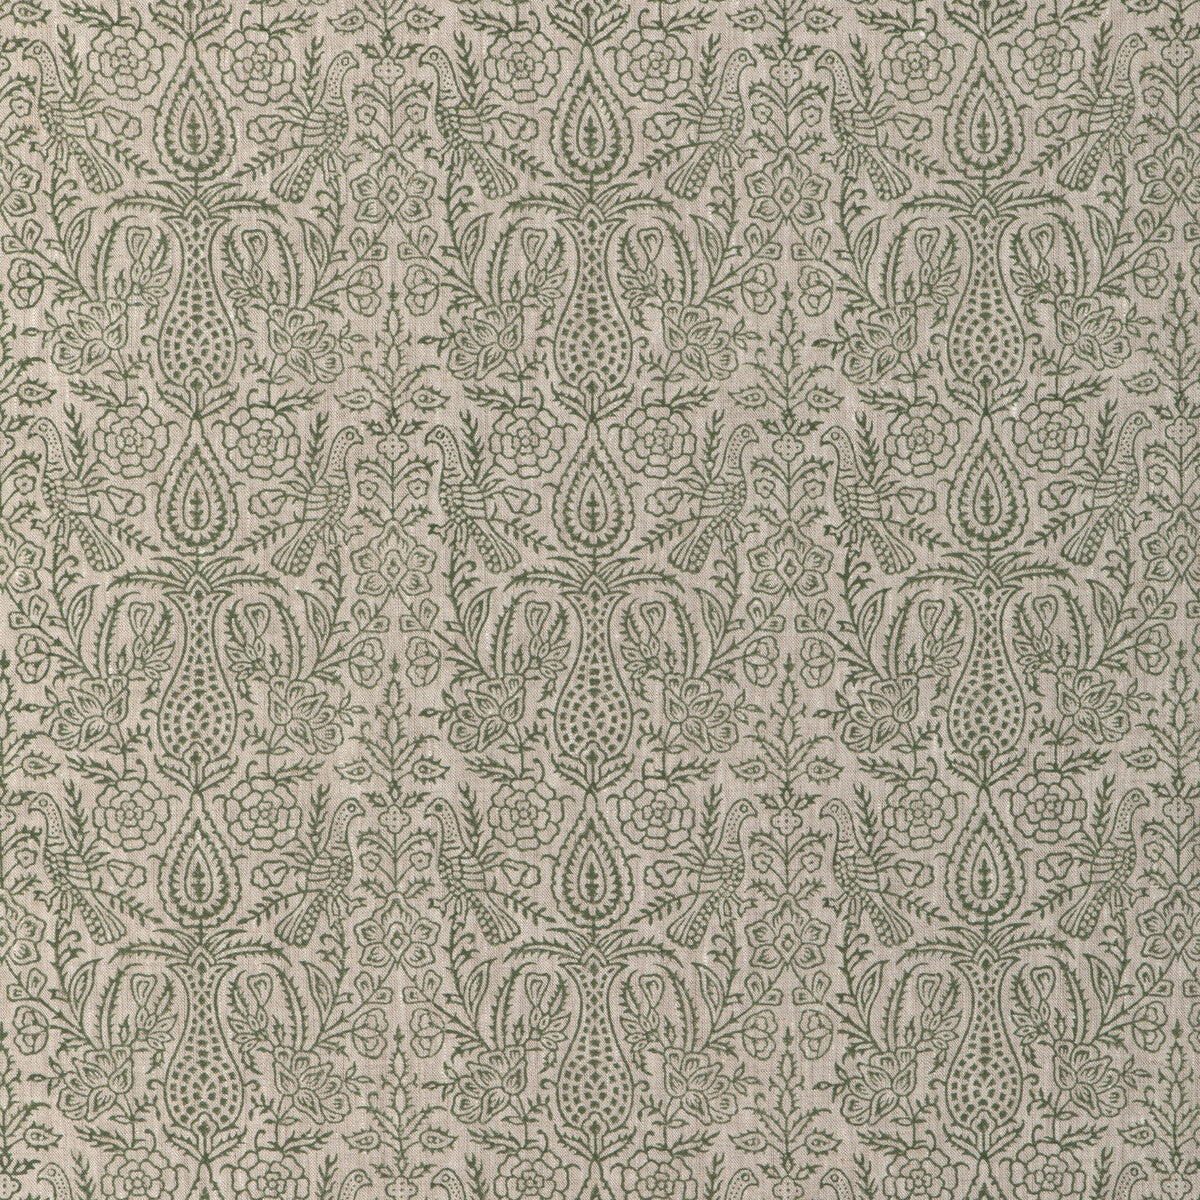 Haven Handblock fabric in moss color - pattern 2023101.3.0 - by Lee Jofa in the Clare Prints collection